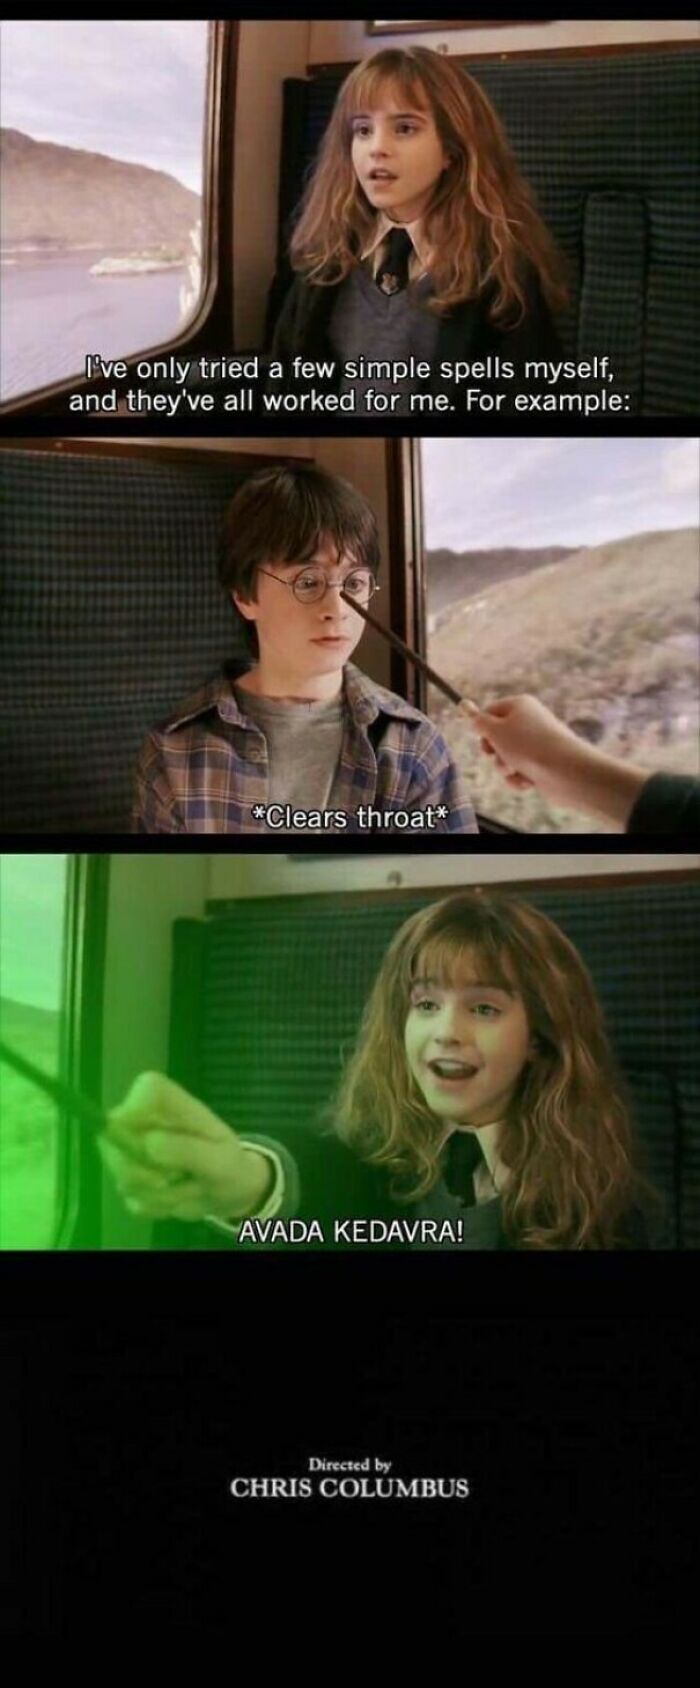 12 Of The Funniest Harry Potter Pictures  Harry potter memes, Harry potter  funny, Harry potter memes hilarious